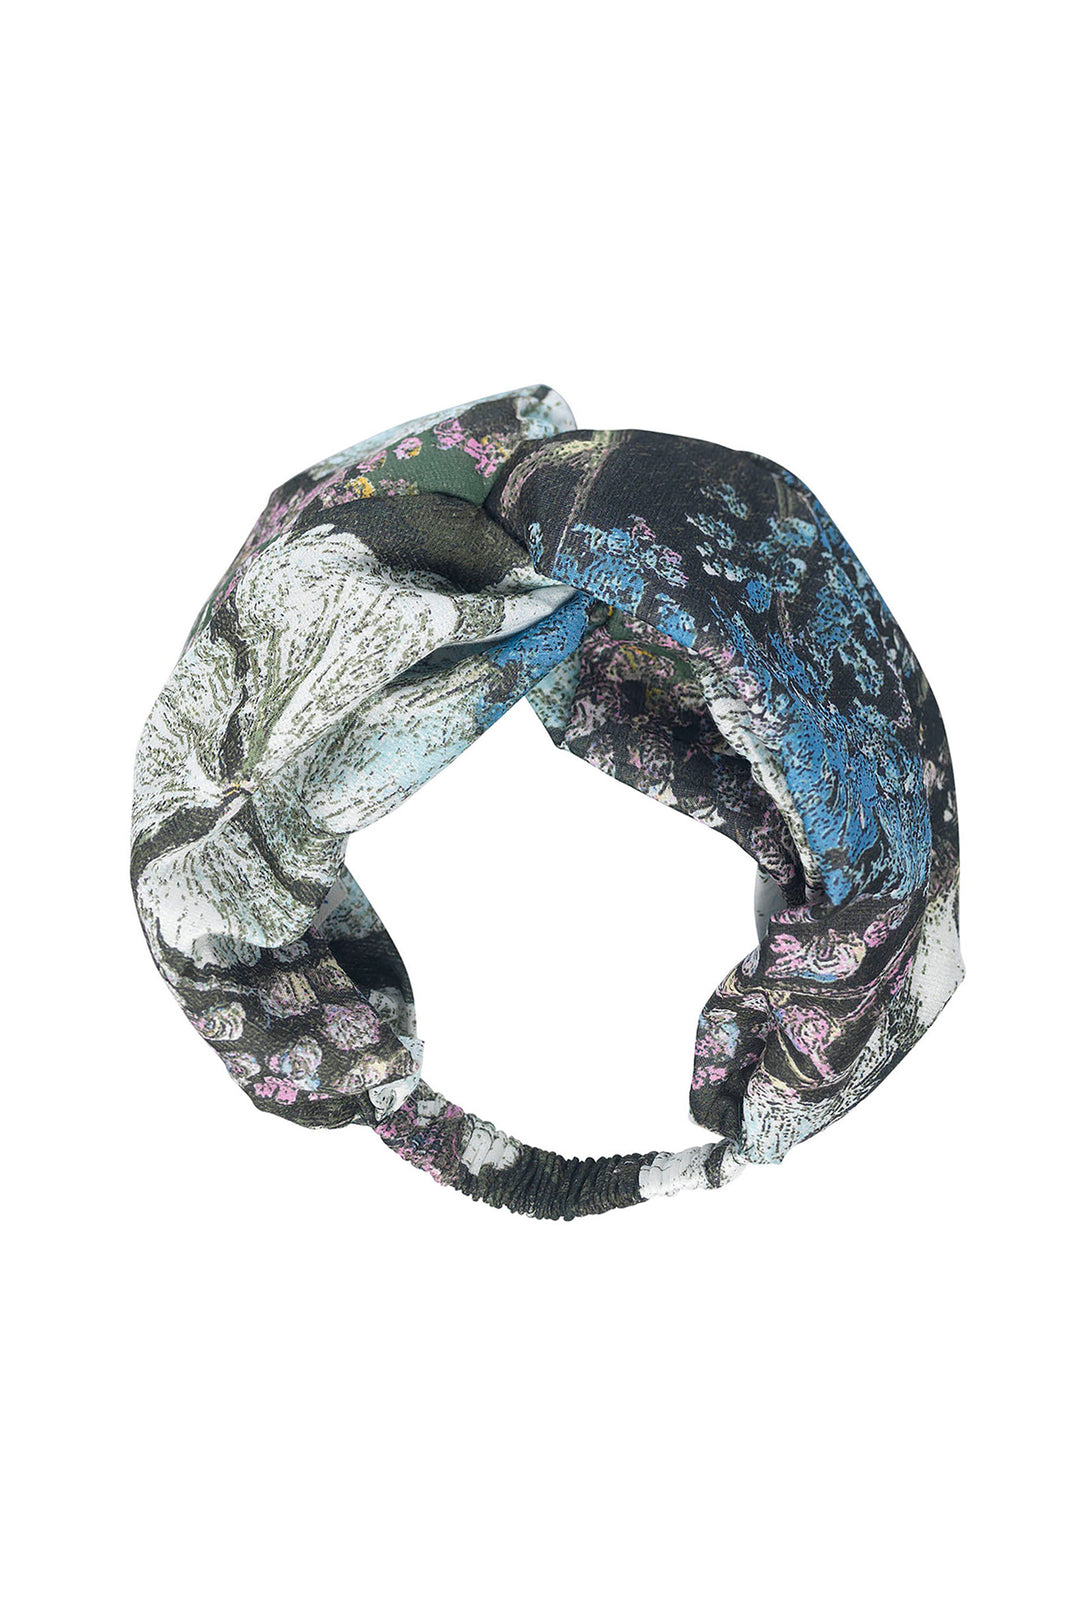 KEW Hydrangea Forest Headband- Our headbands are made from 100% recycled material using offcuts from our clothing production.